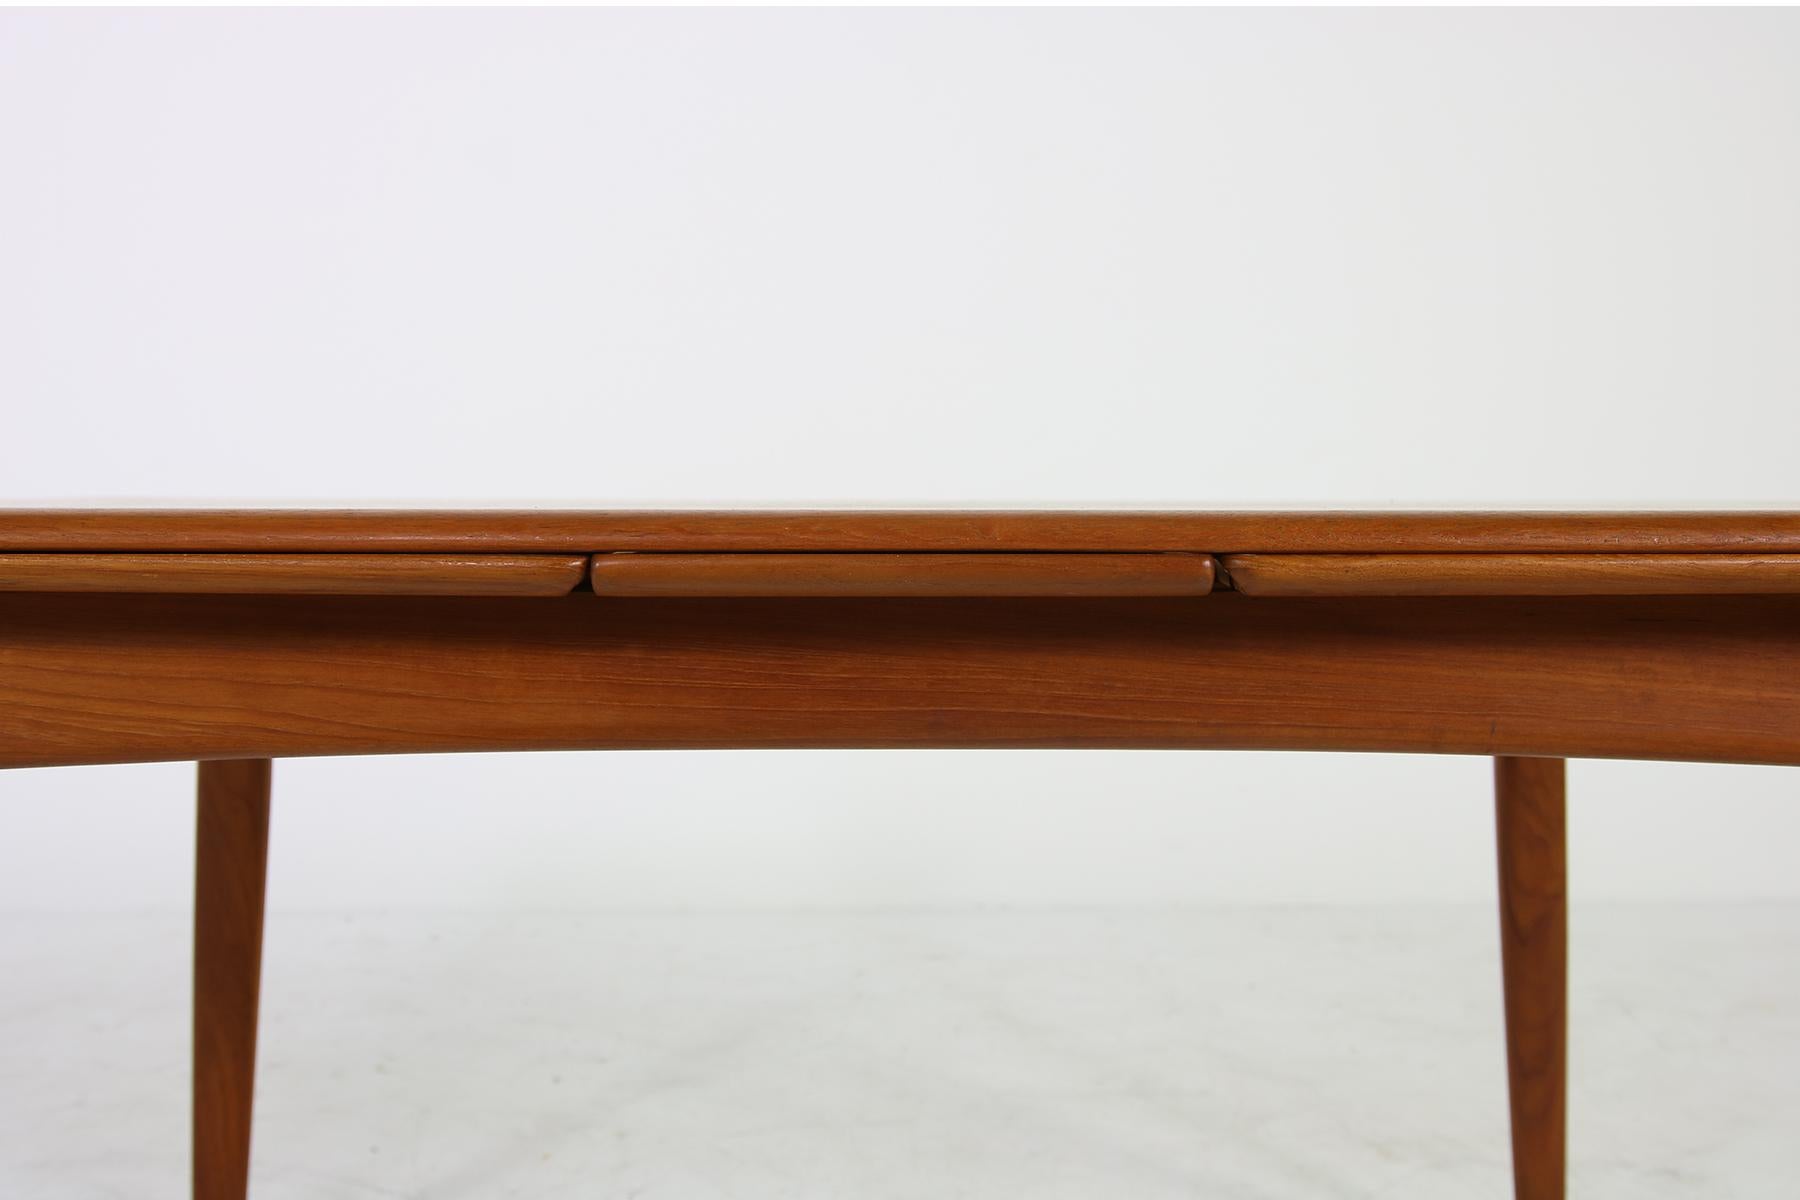 Beautiful 1960s Danish modern dining table, designed by Svend Aage Madsen, made in Denmark, manufactured by K. Knudsen & Son, beautiful table in a fantastic condition, amazing teak wood, extendable. Signed underneath. Measurements 145 x 85 cm 72 cm